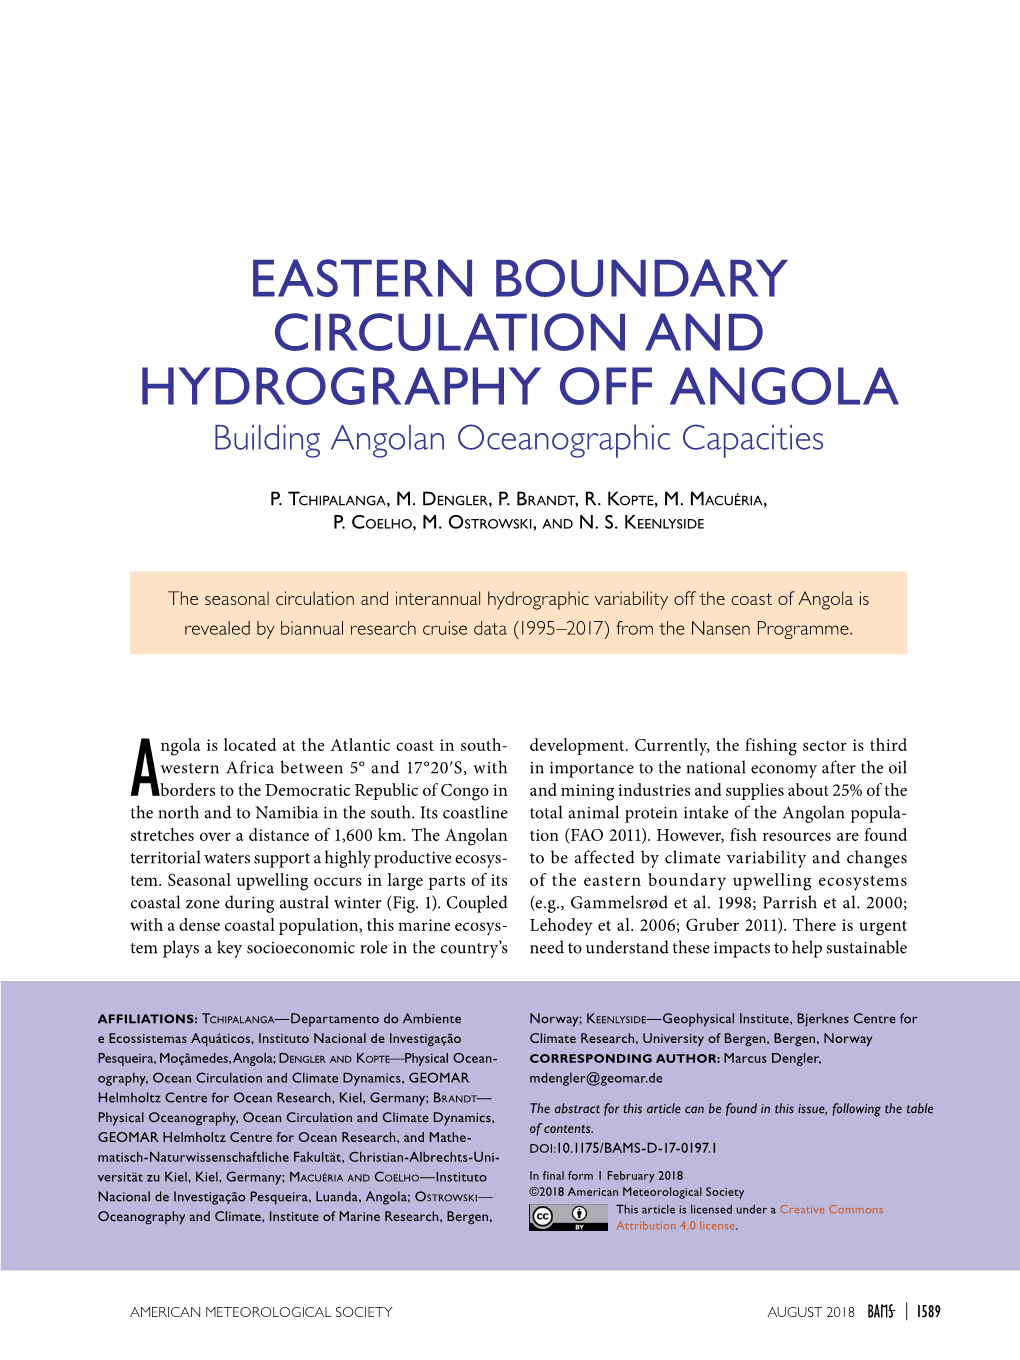 EASTERN BOUNDARY CIRCULATION and HYDROGRAPHY OFF ANGOLA Building Angolan Oceanographic Capacities